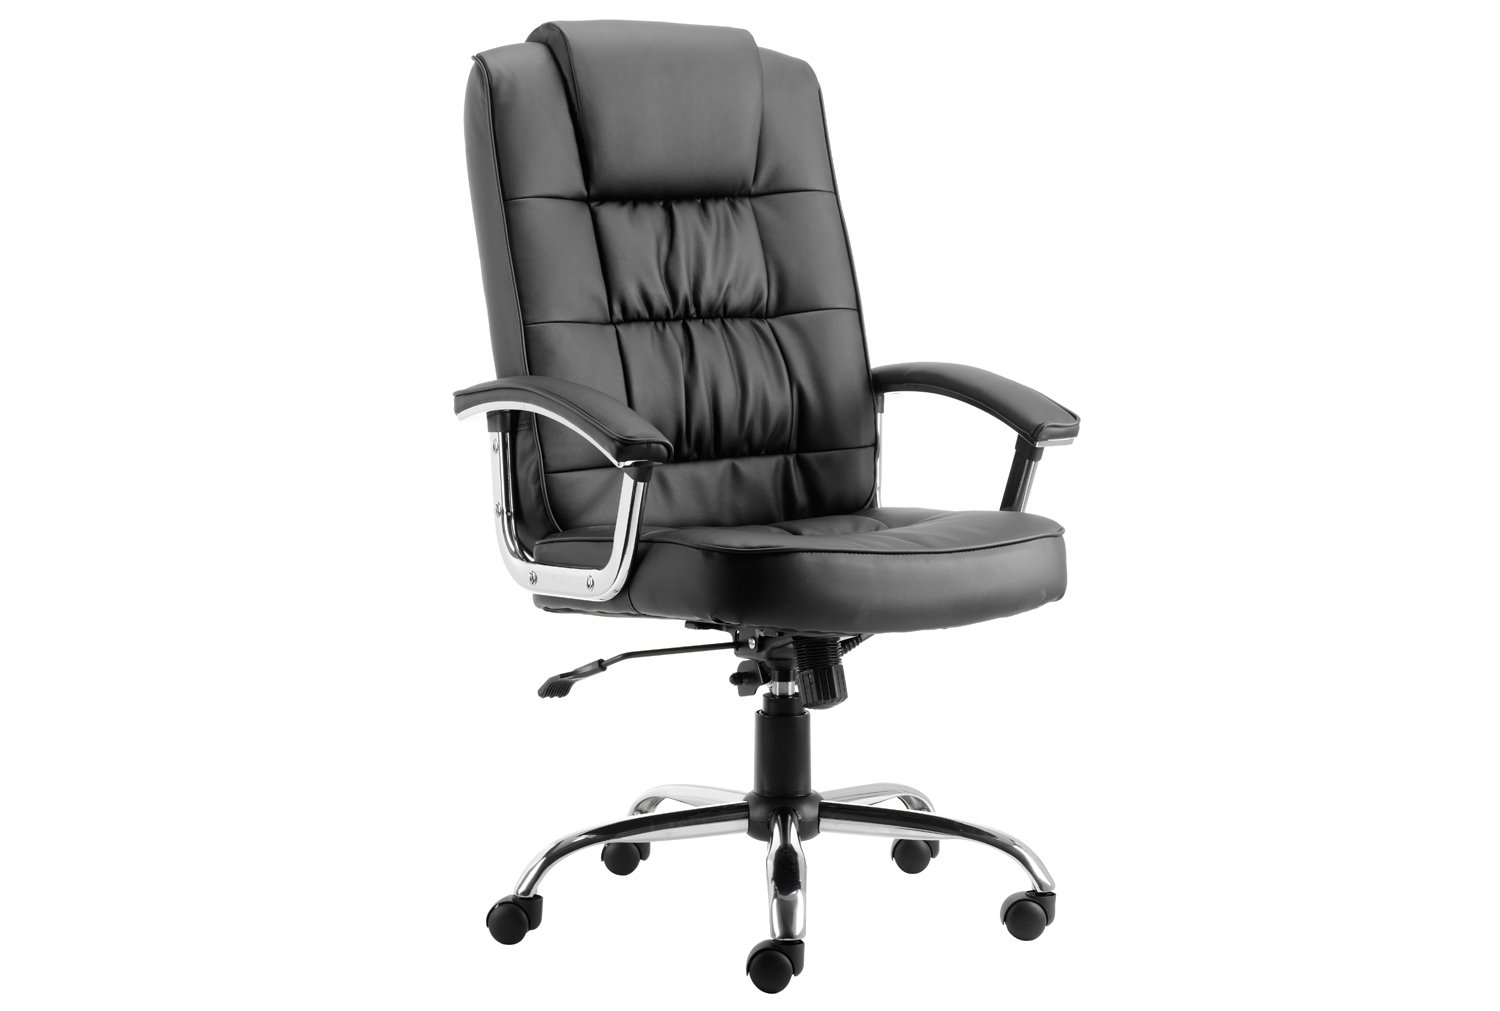 Muscat Deluxe Executive Leather Office Chair, Black